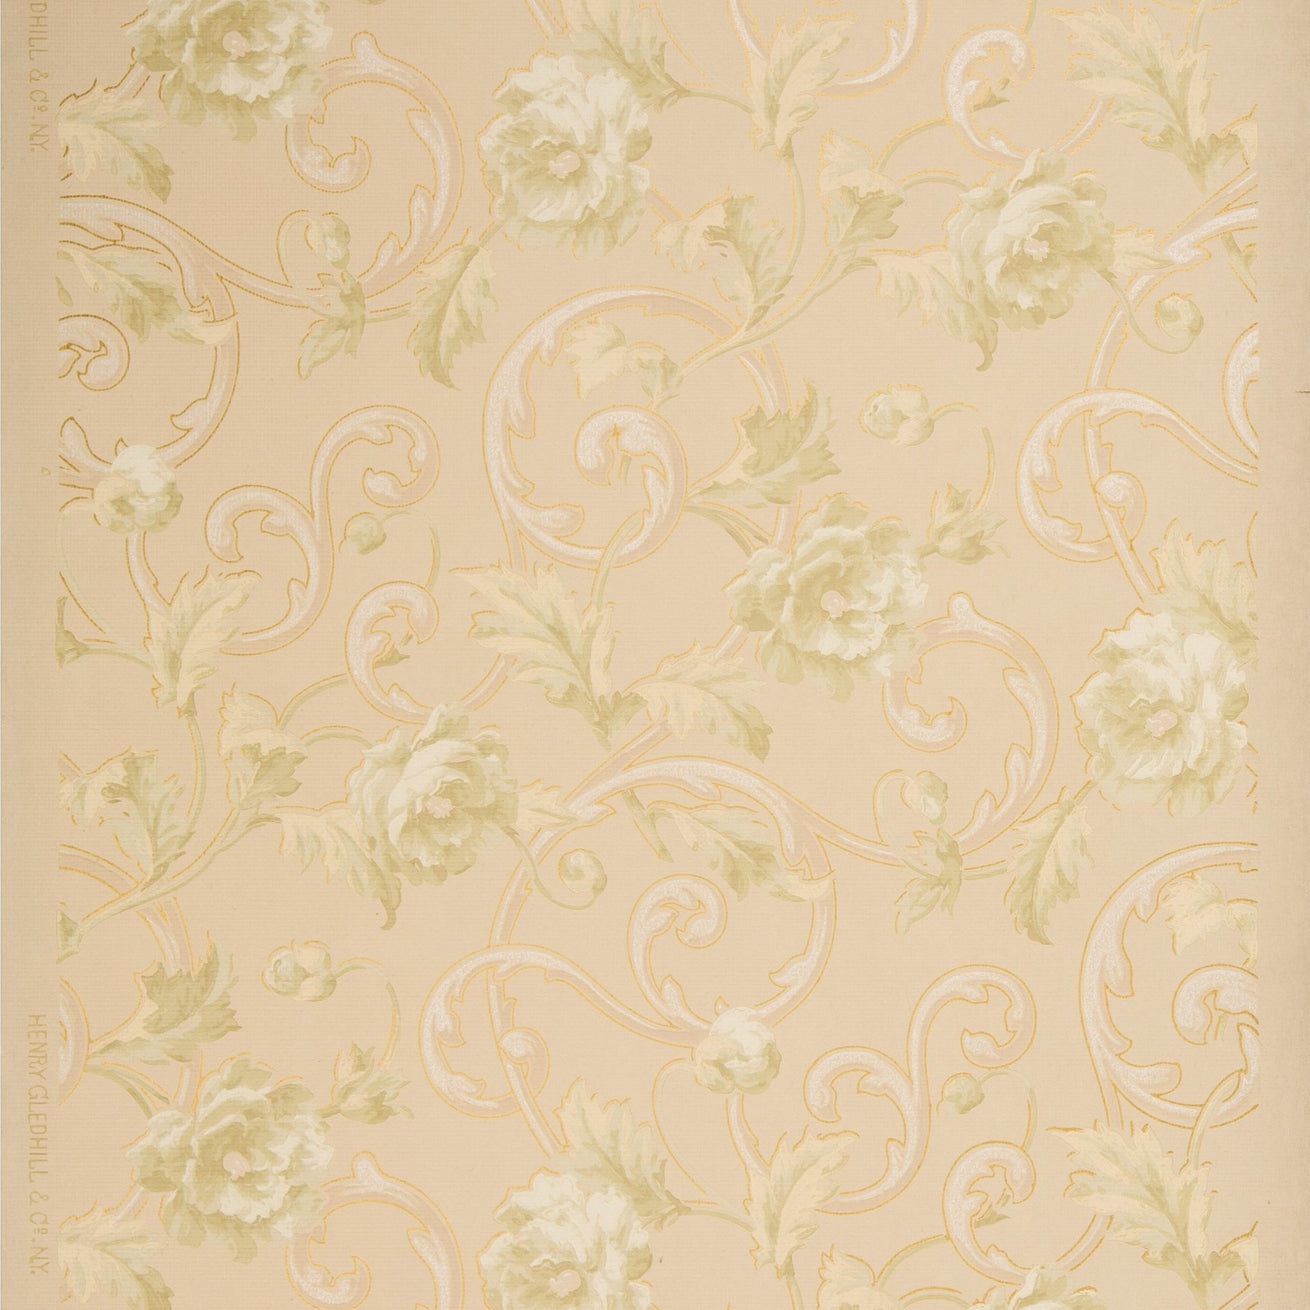 Pale Roses and Foliate Scrolls - Antique Wallpaper Remnant